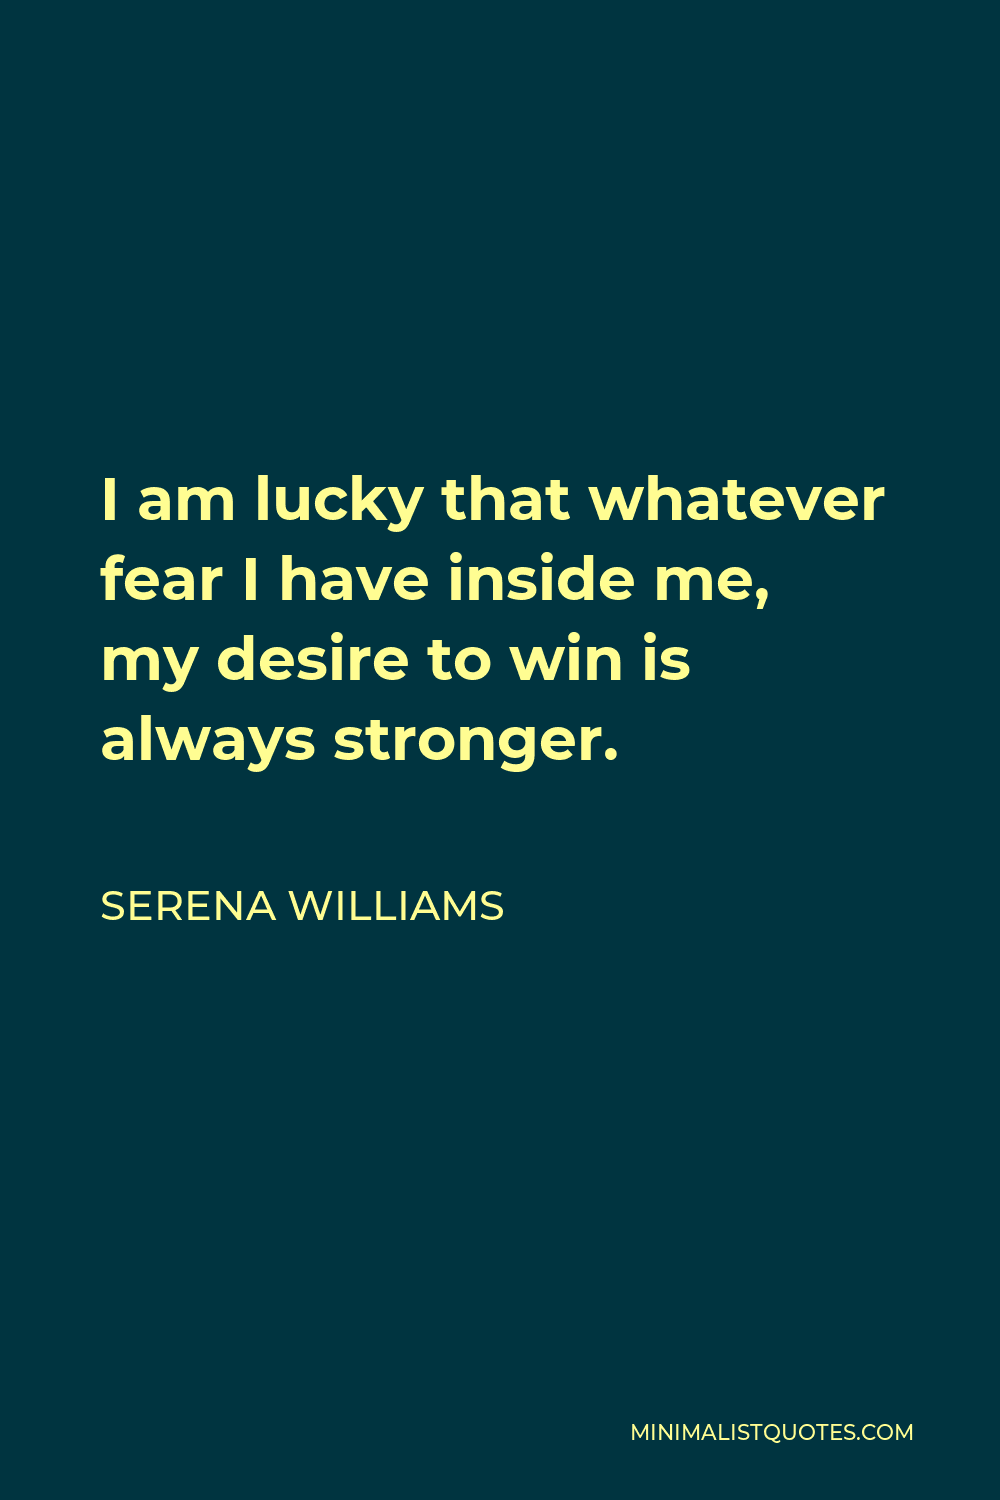 Serena Williams Quote - I am lucky that whatever fear I have inside me, my desire to win is always stronger.